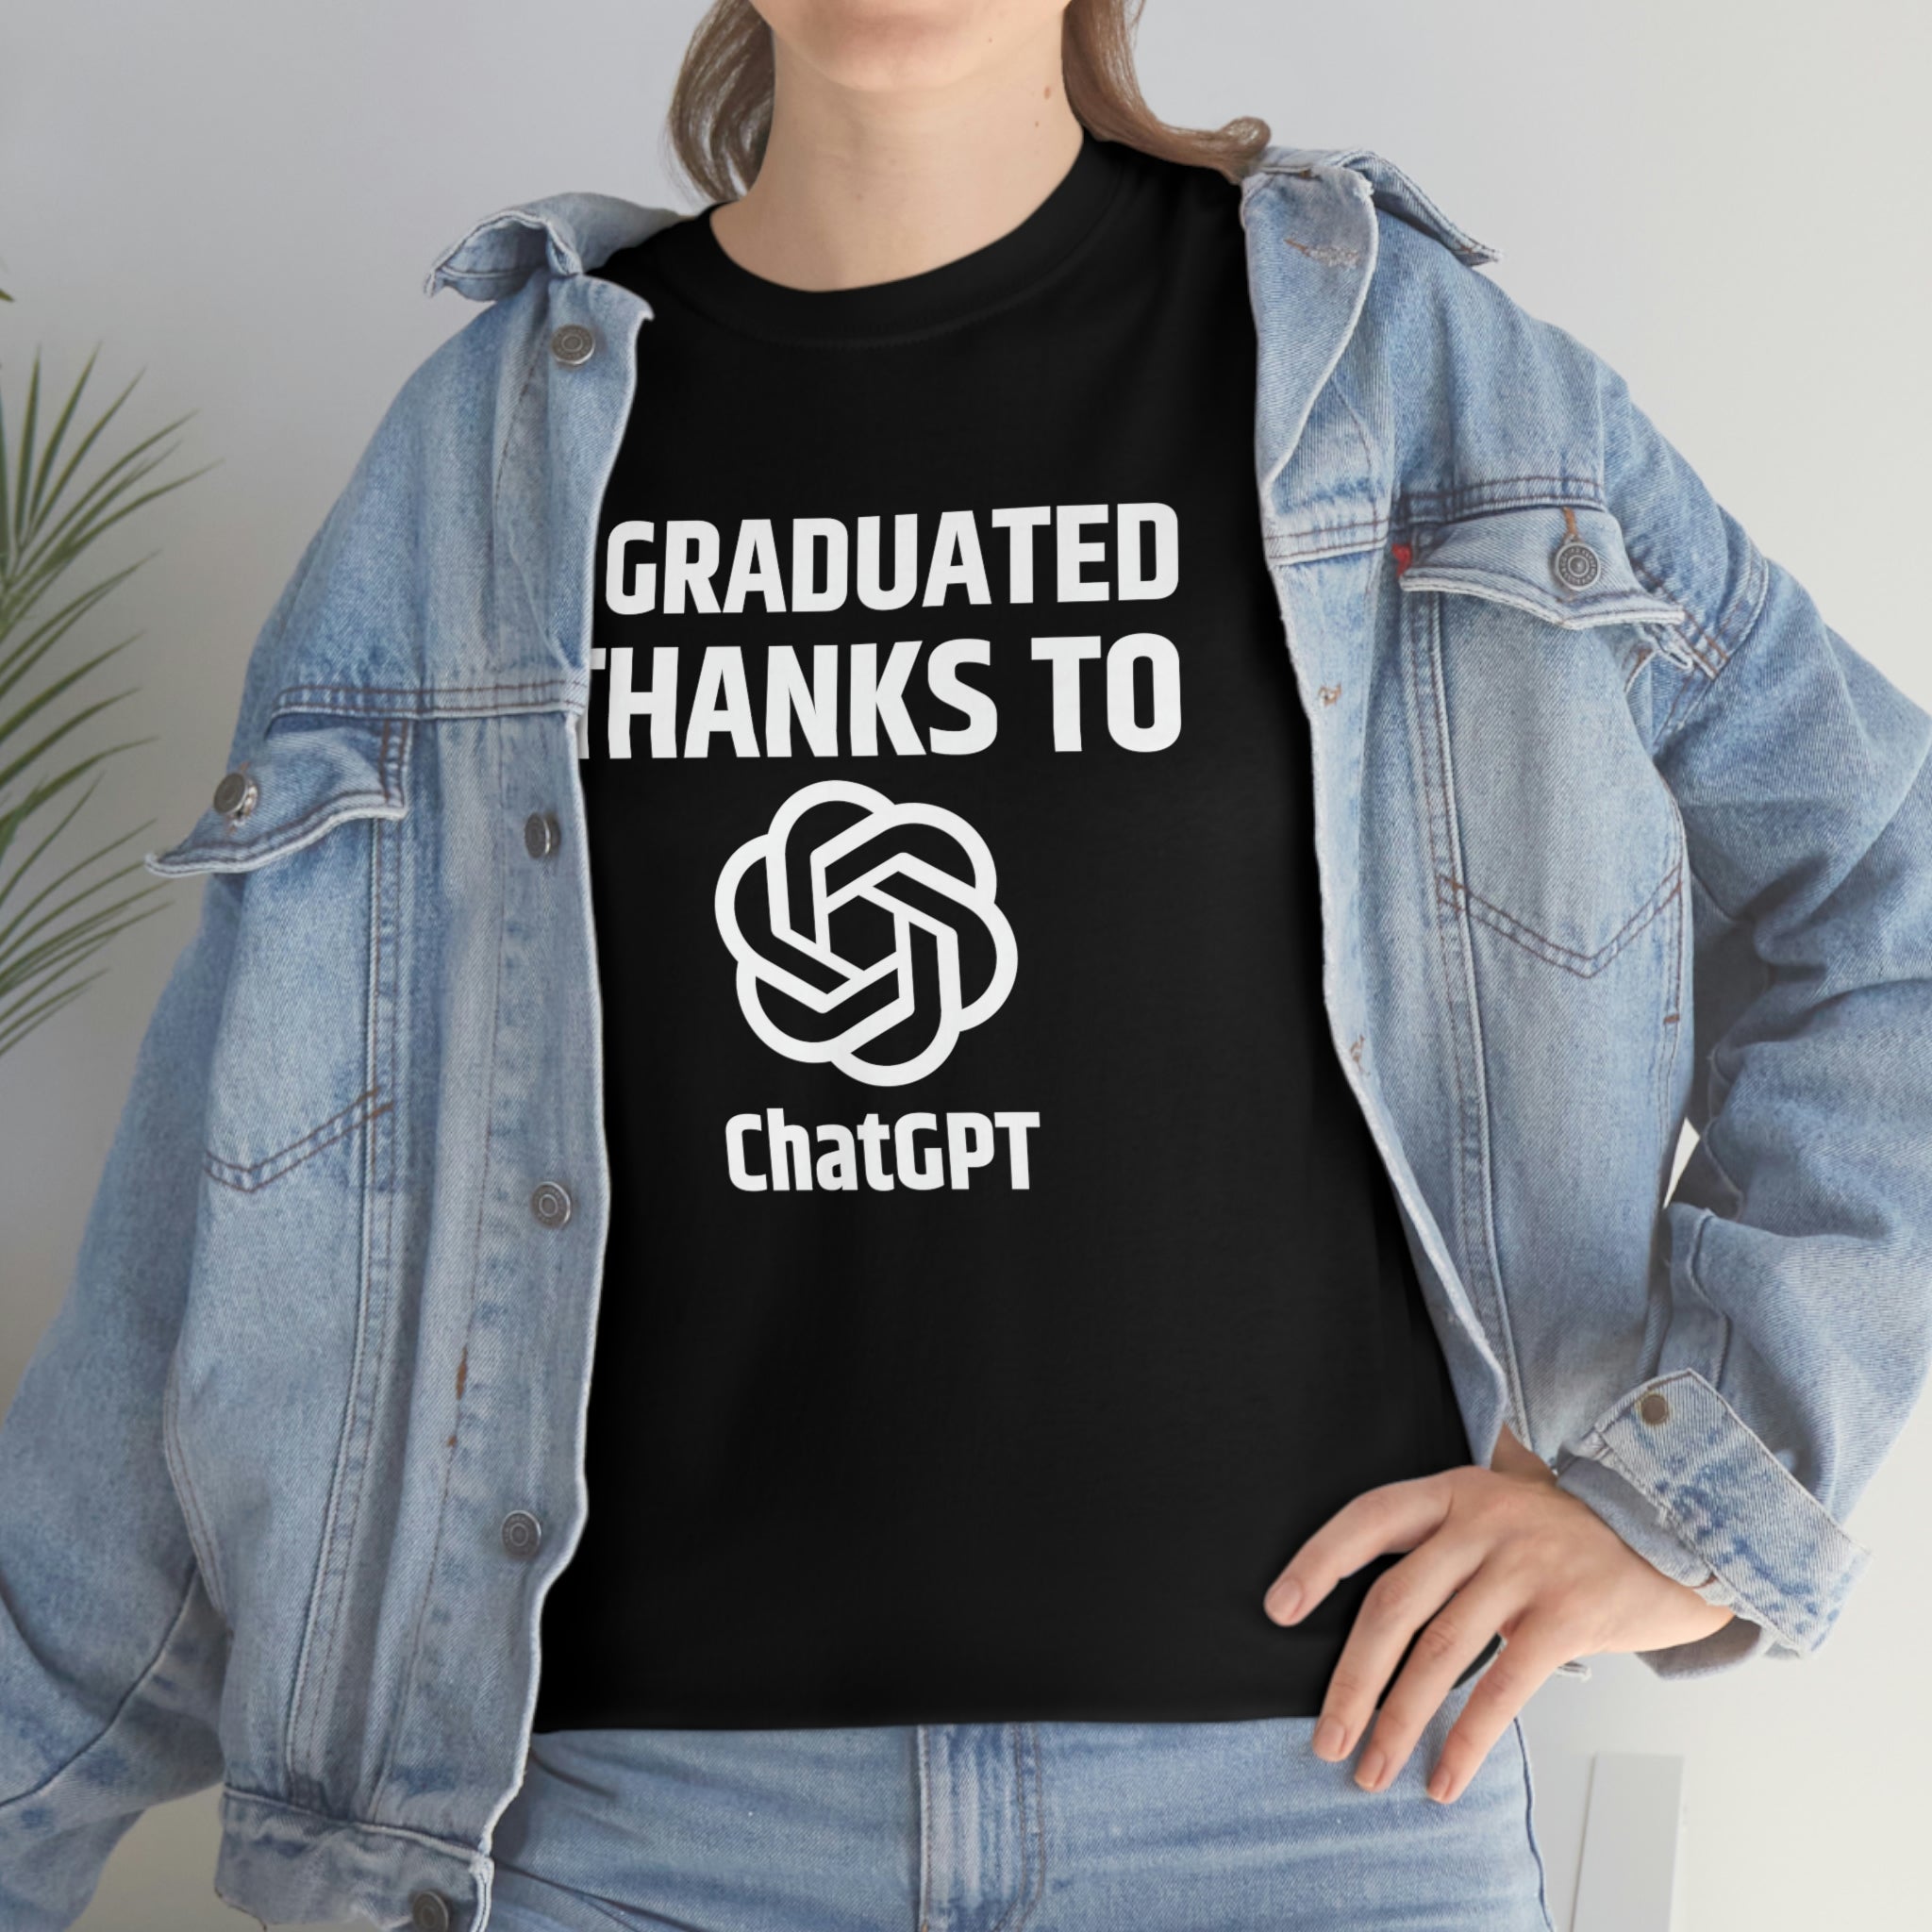 I Graduated Thanks to ChatGPT- Unisex Heavy Cotton Tee